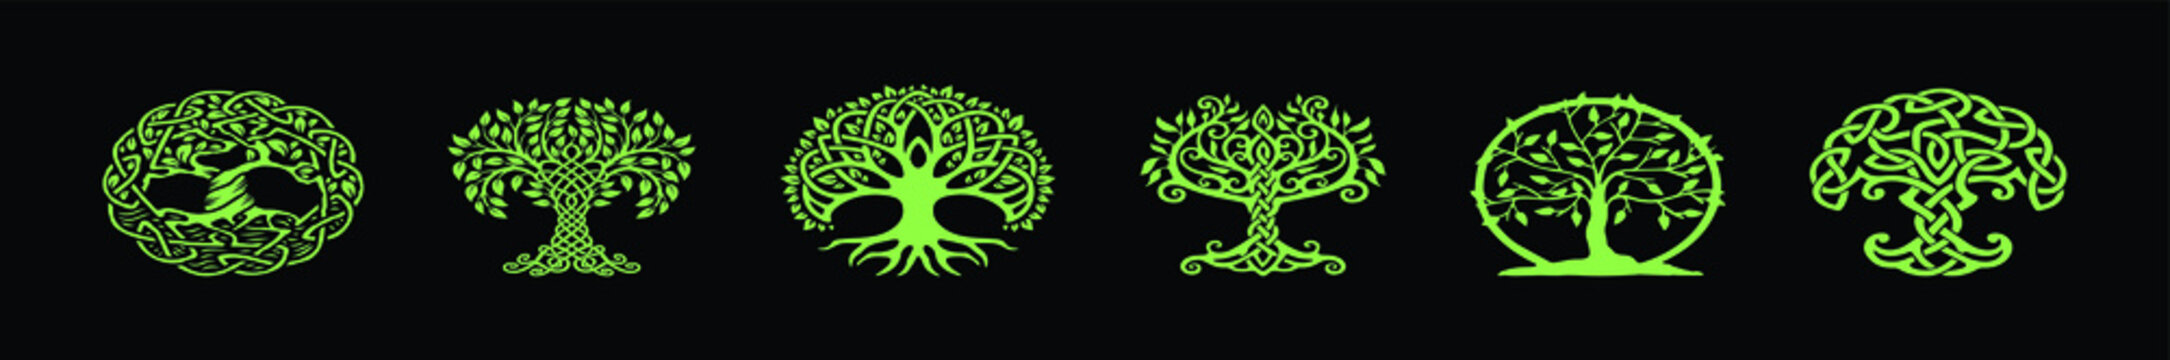 set of tree with roots in various models design template for logo and more isolated on black